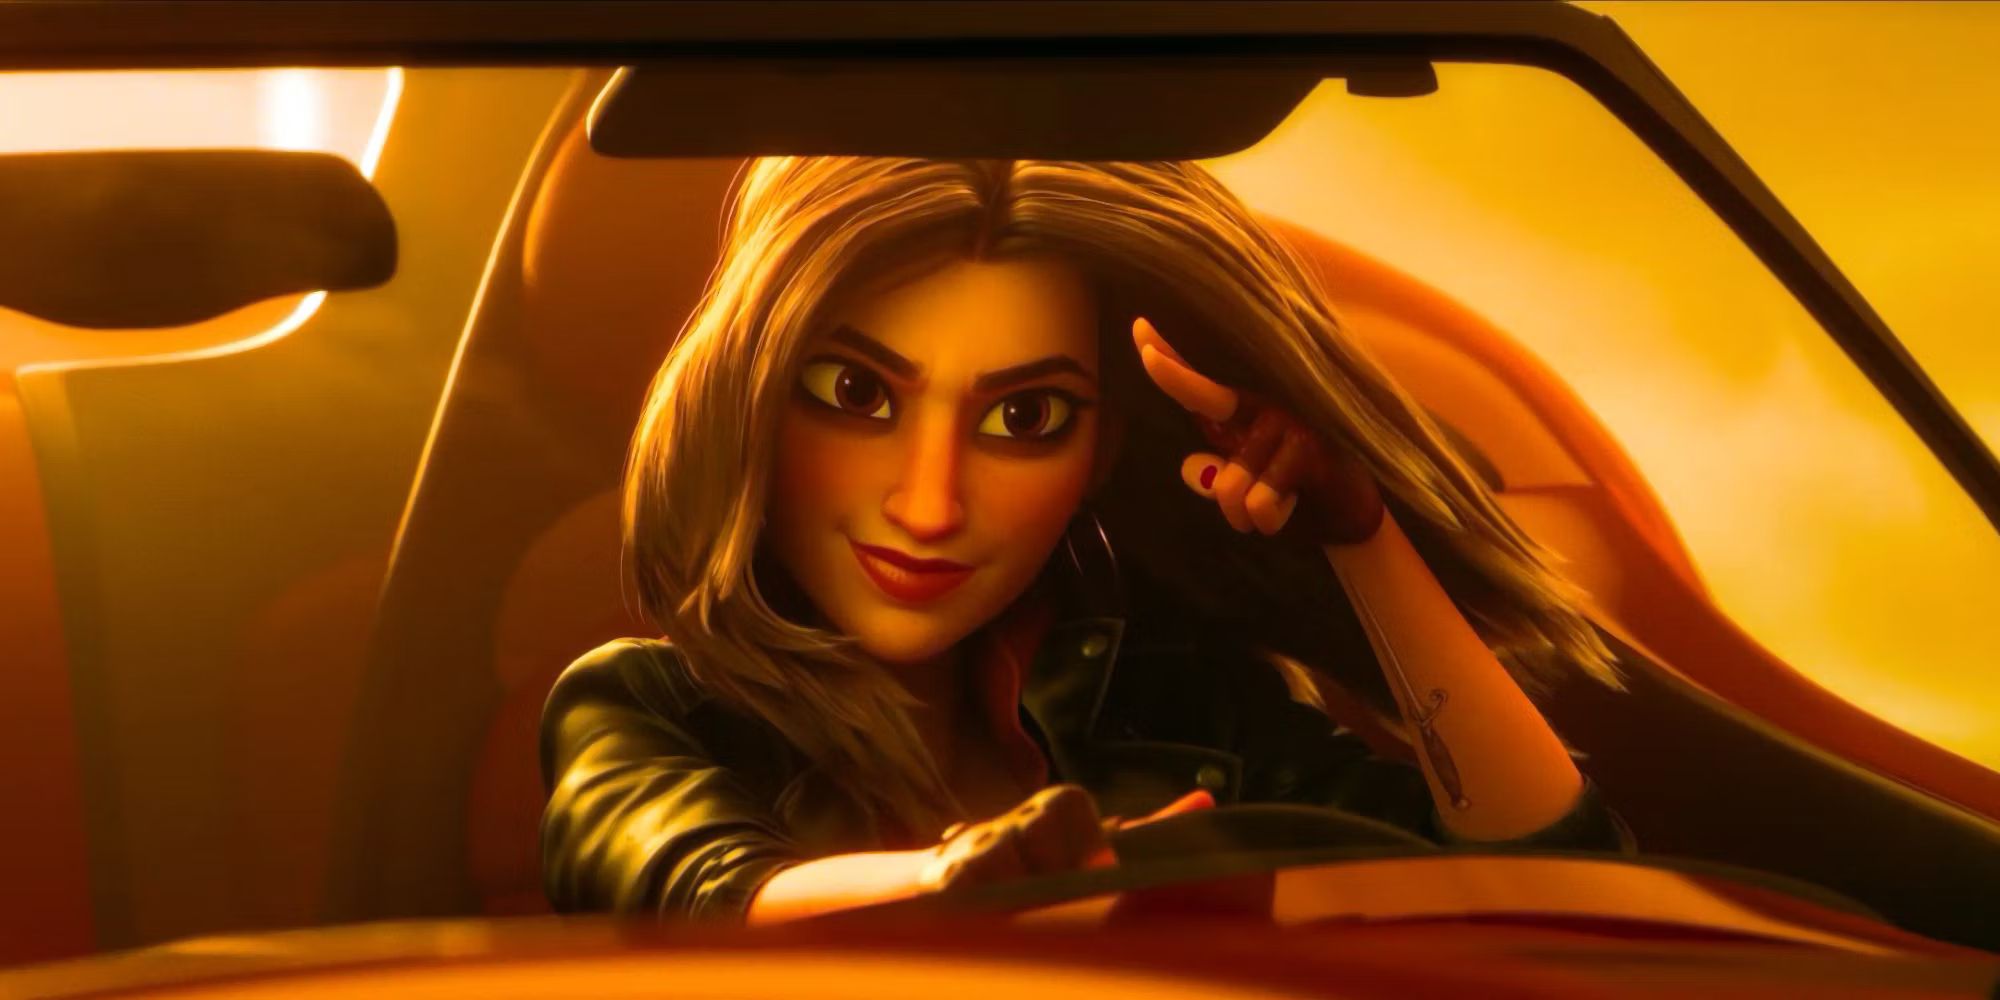 Shank in Ralph Breaks the Internet, Shank driving her car and saluting